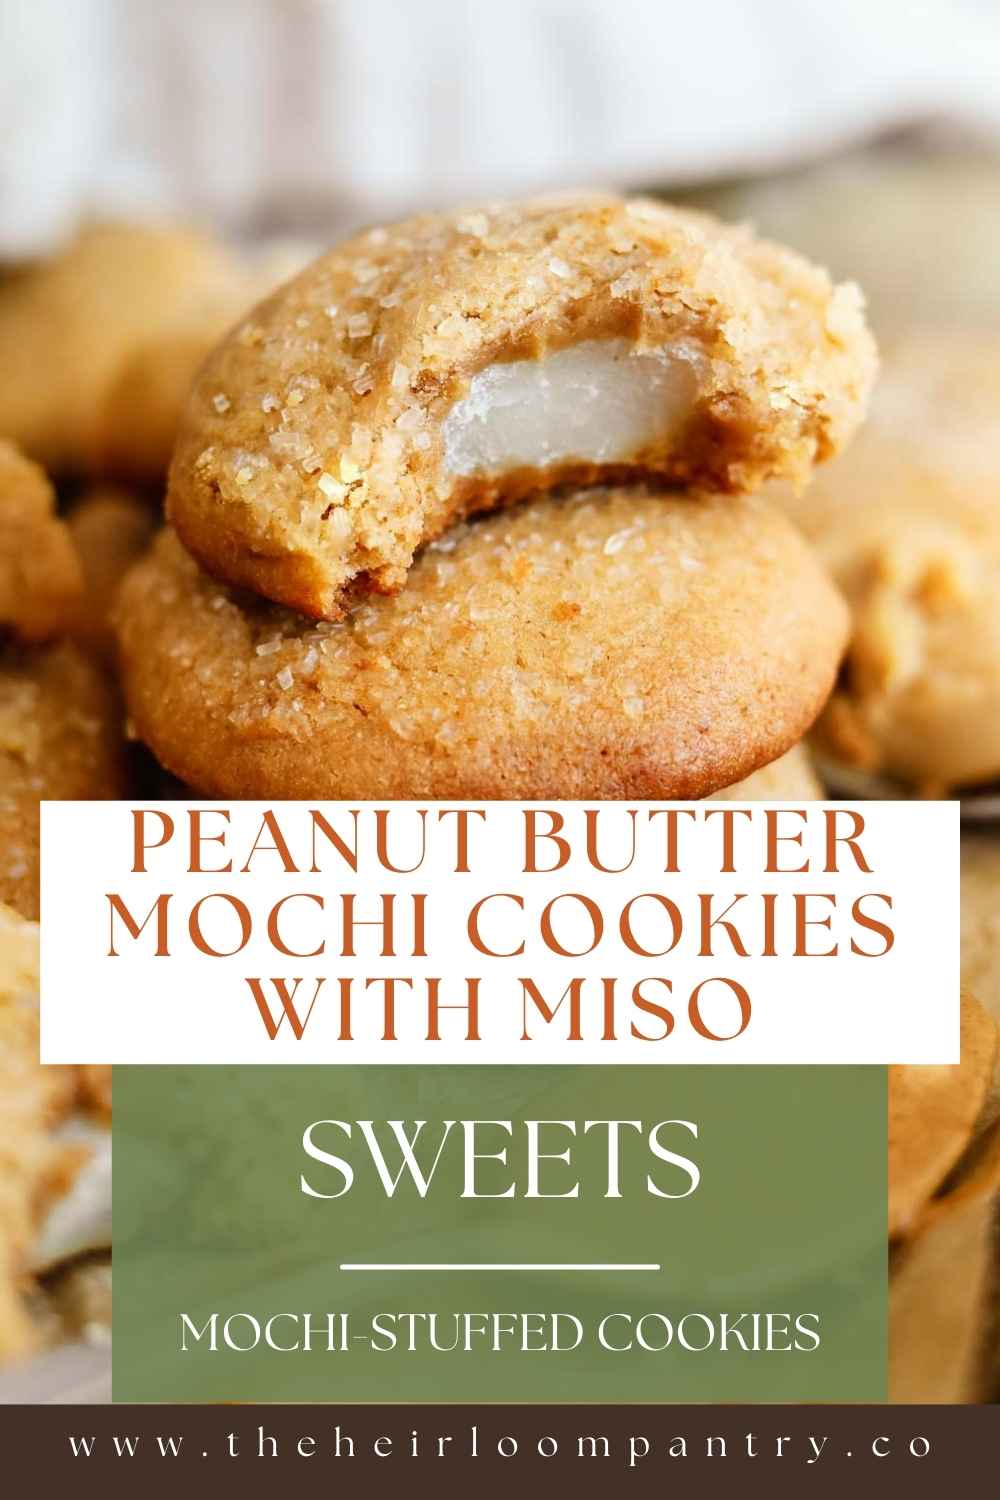 Peanut butter mochi cookies with miso Pinterest pin.